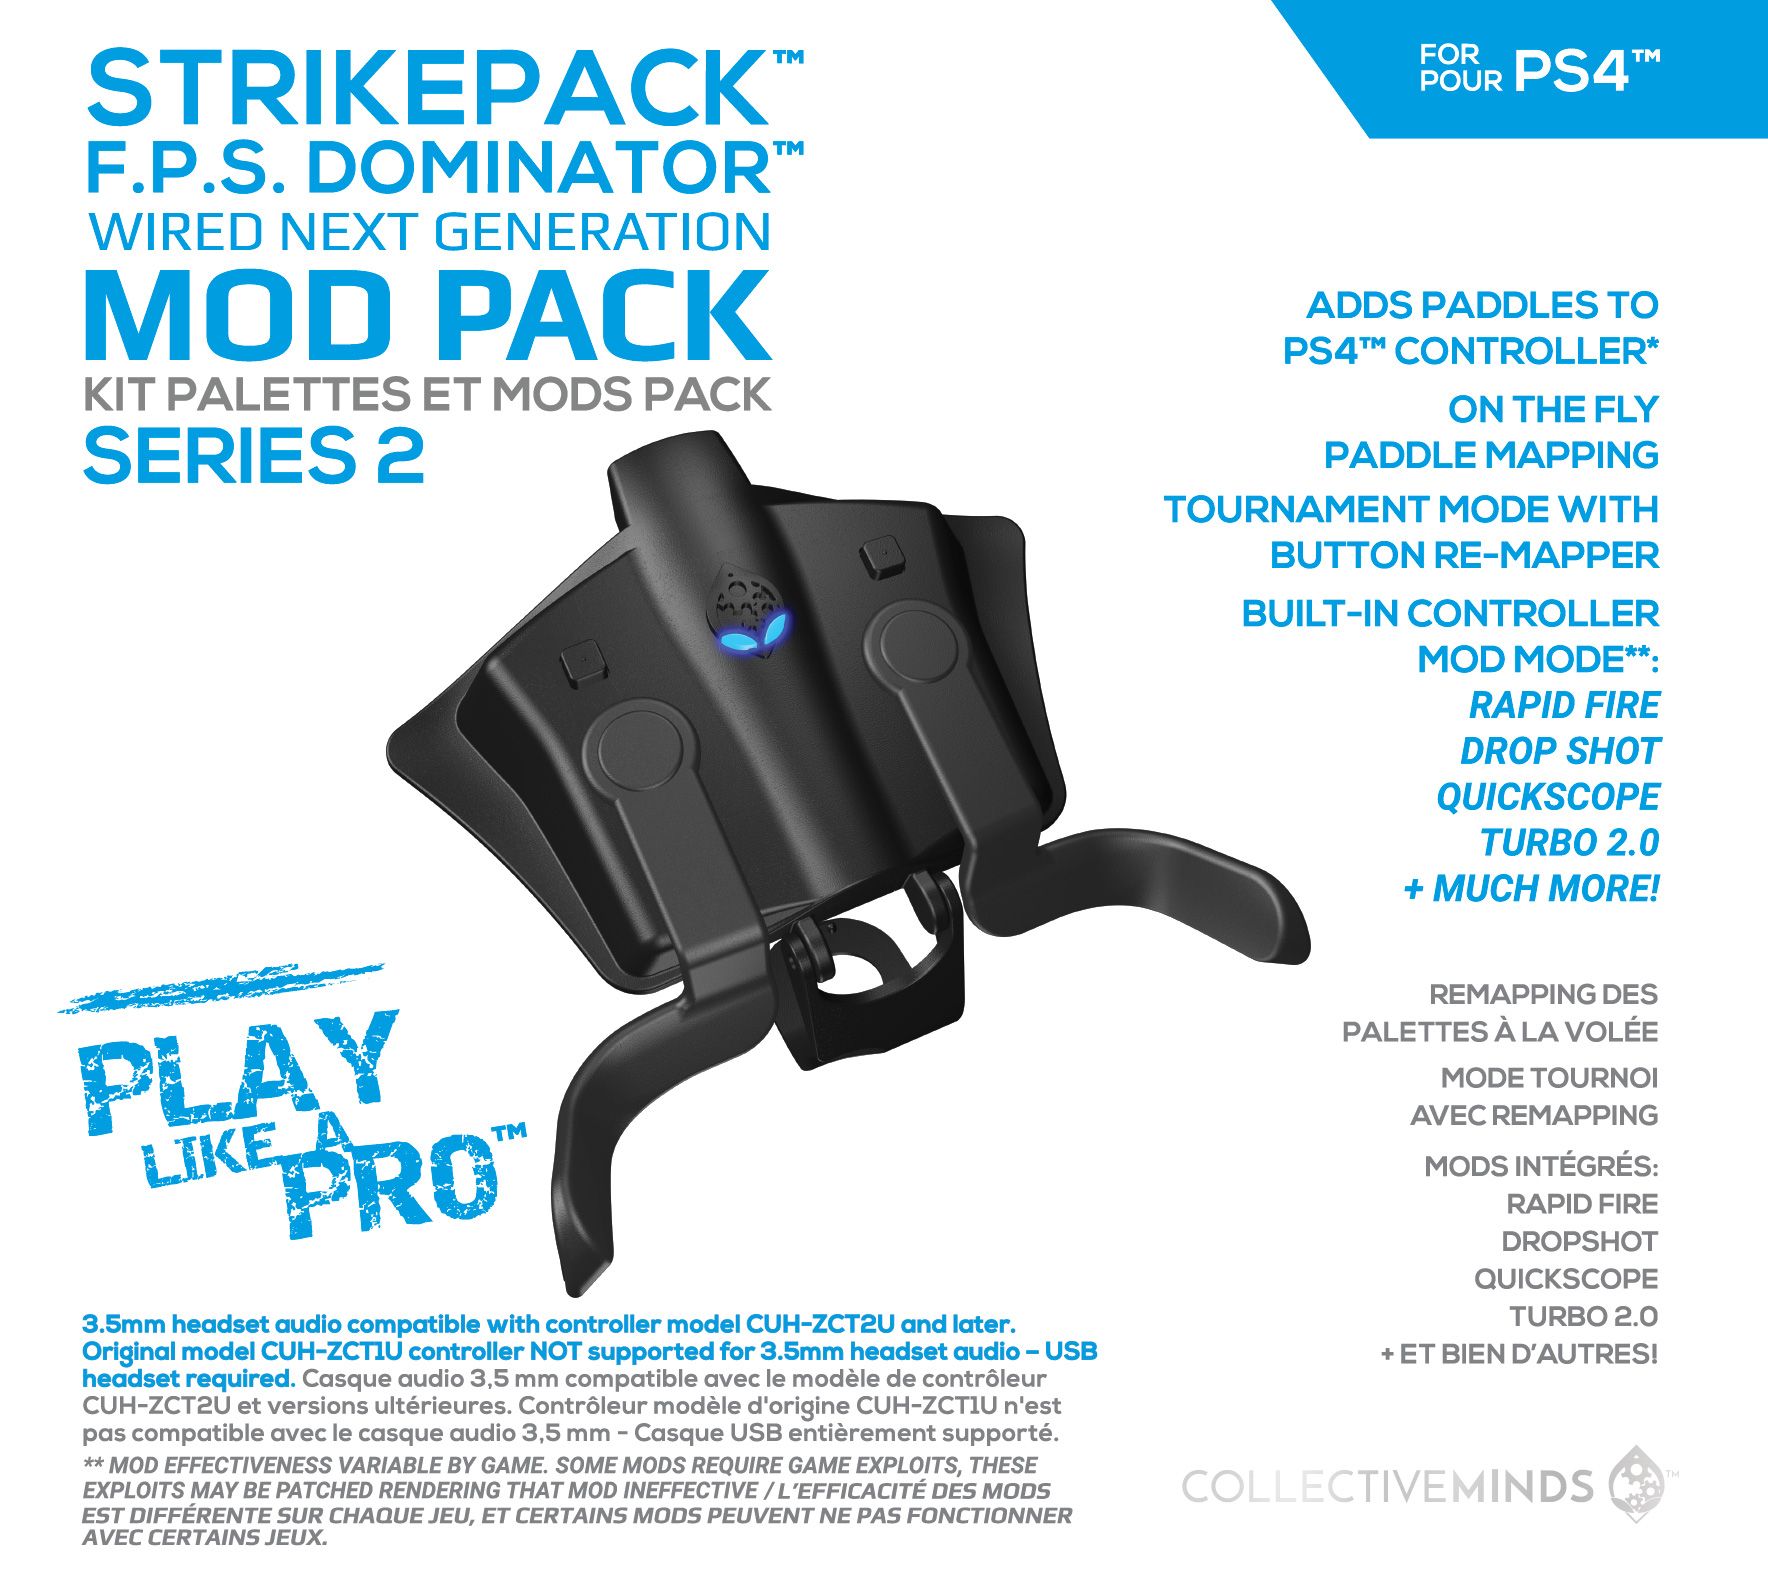 - Collective Minds StrikePack F.P.S. Dominator Controller Mod Pack - Series 2 (PS4)(New) - Collective was for R1,340.00 19 Jun at 06:33 by Pwned Games in Cape Town (ID:507229451)